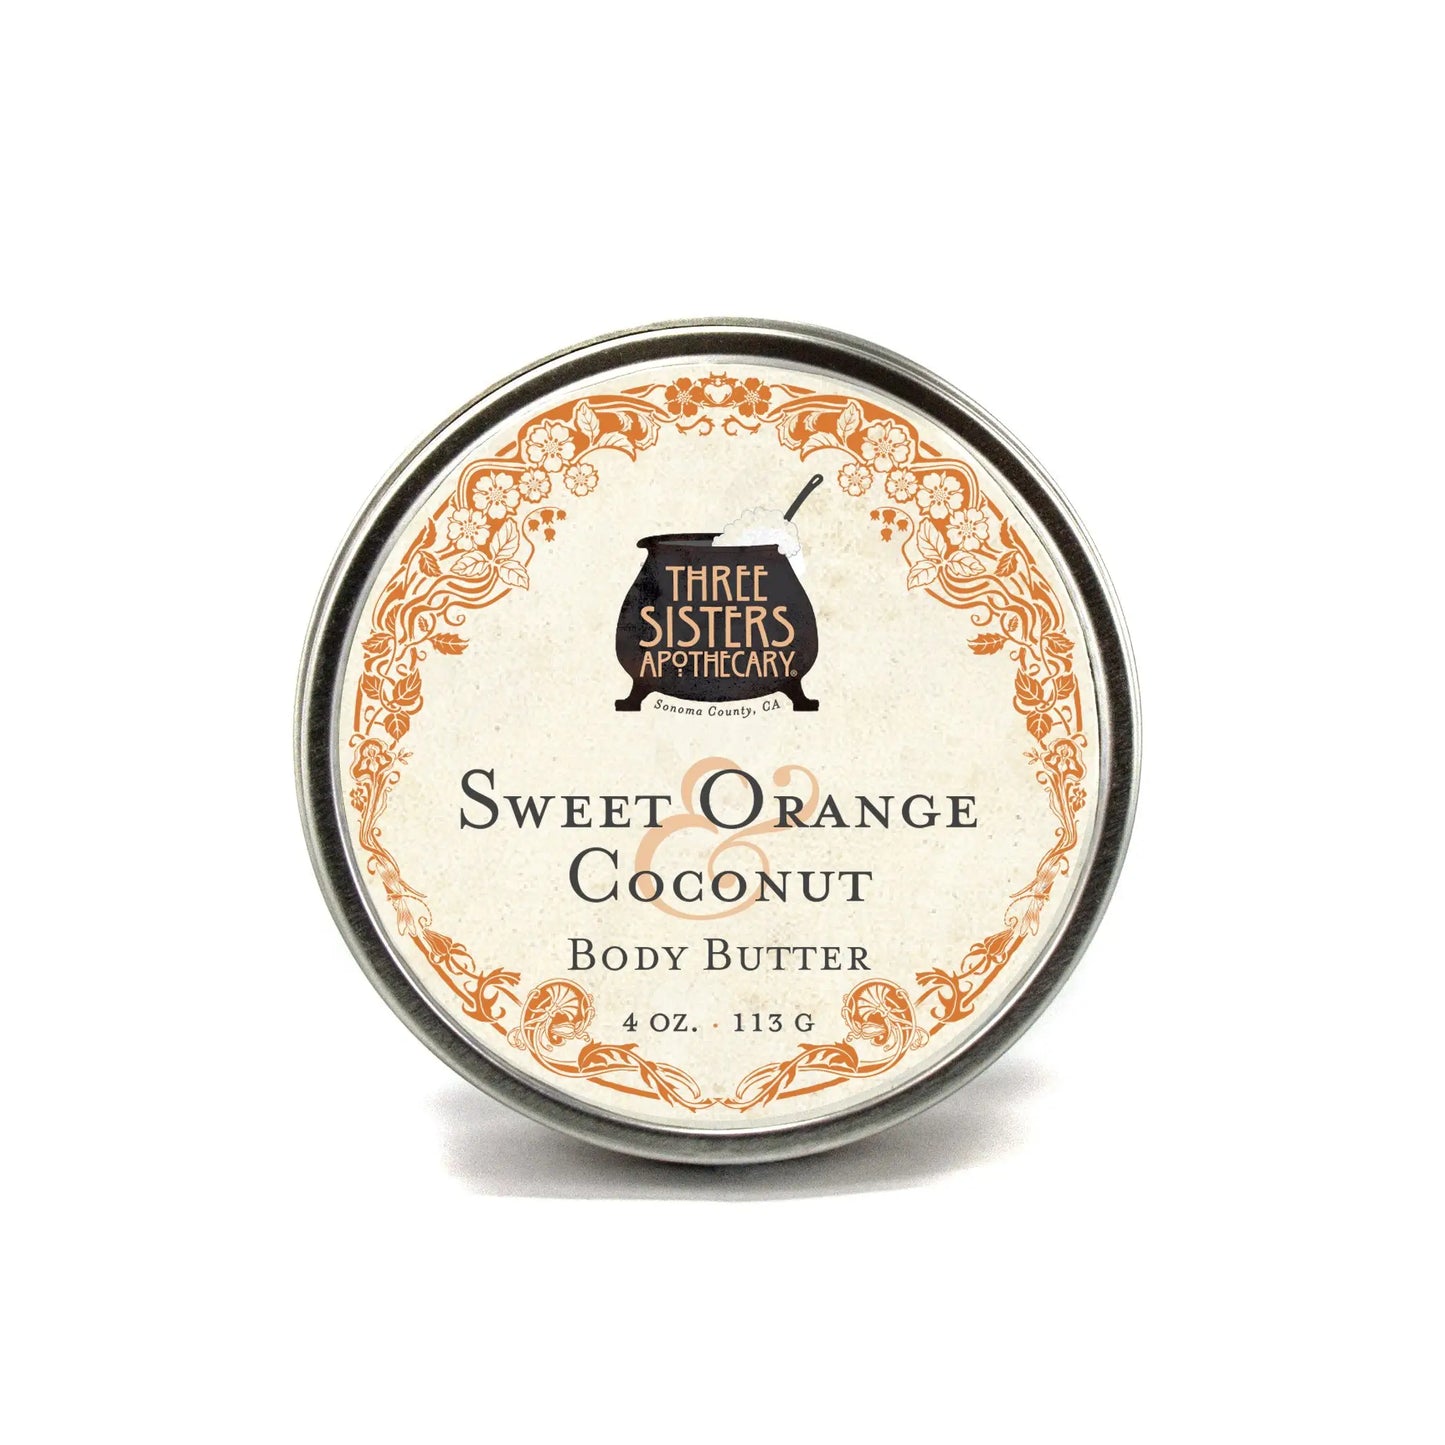 Sweet Orange & Coconut Body Butter By Three Sisters Apothecary